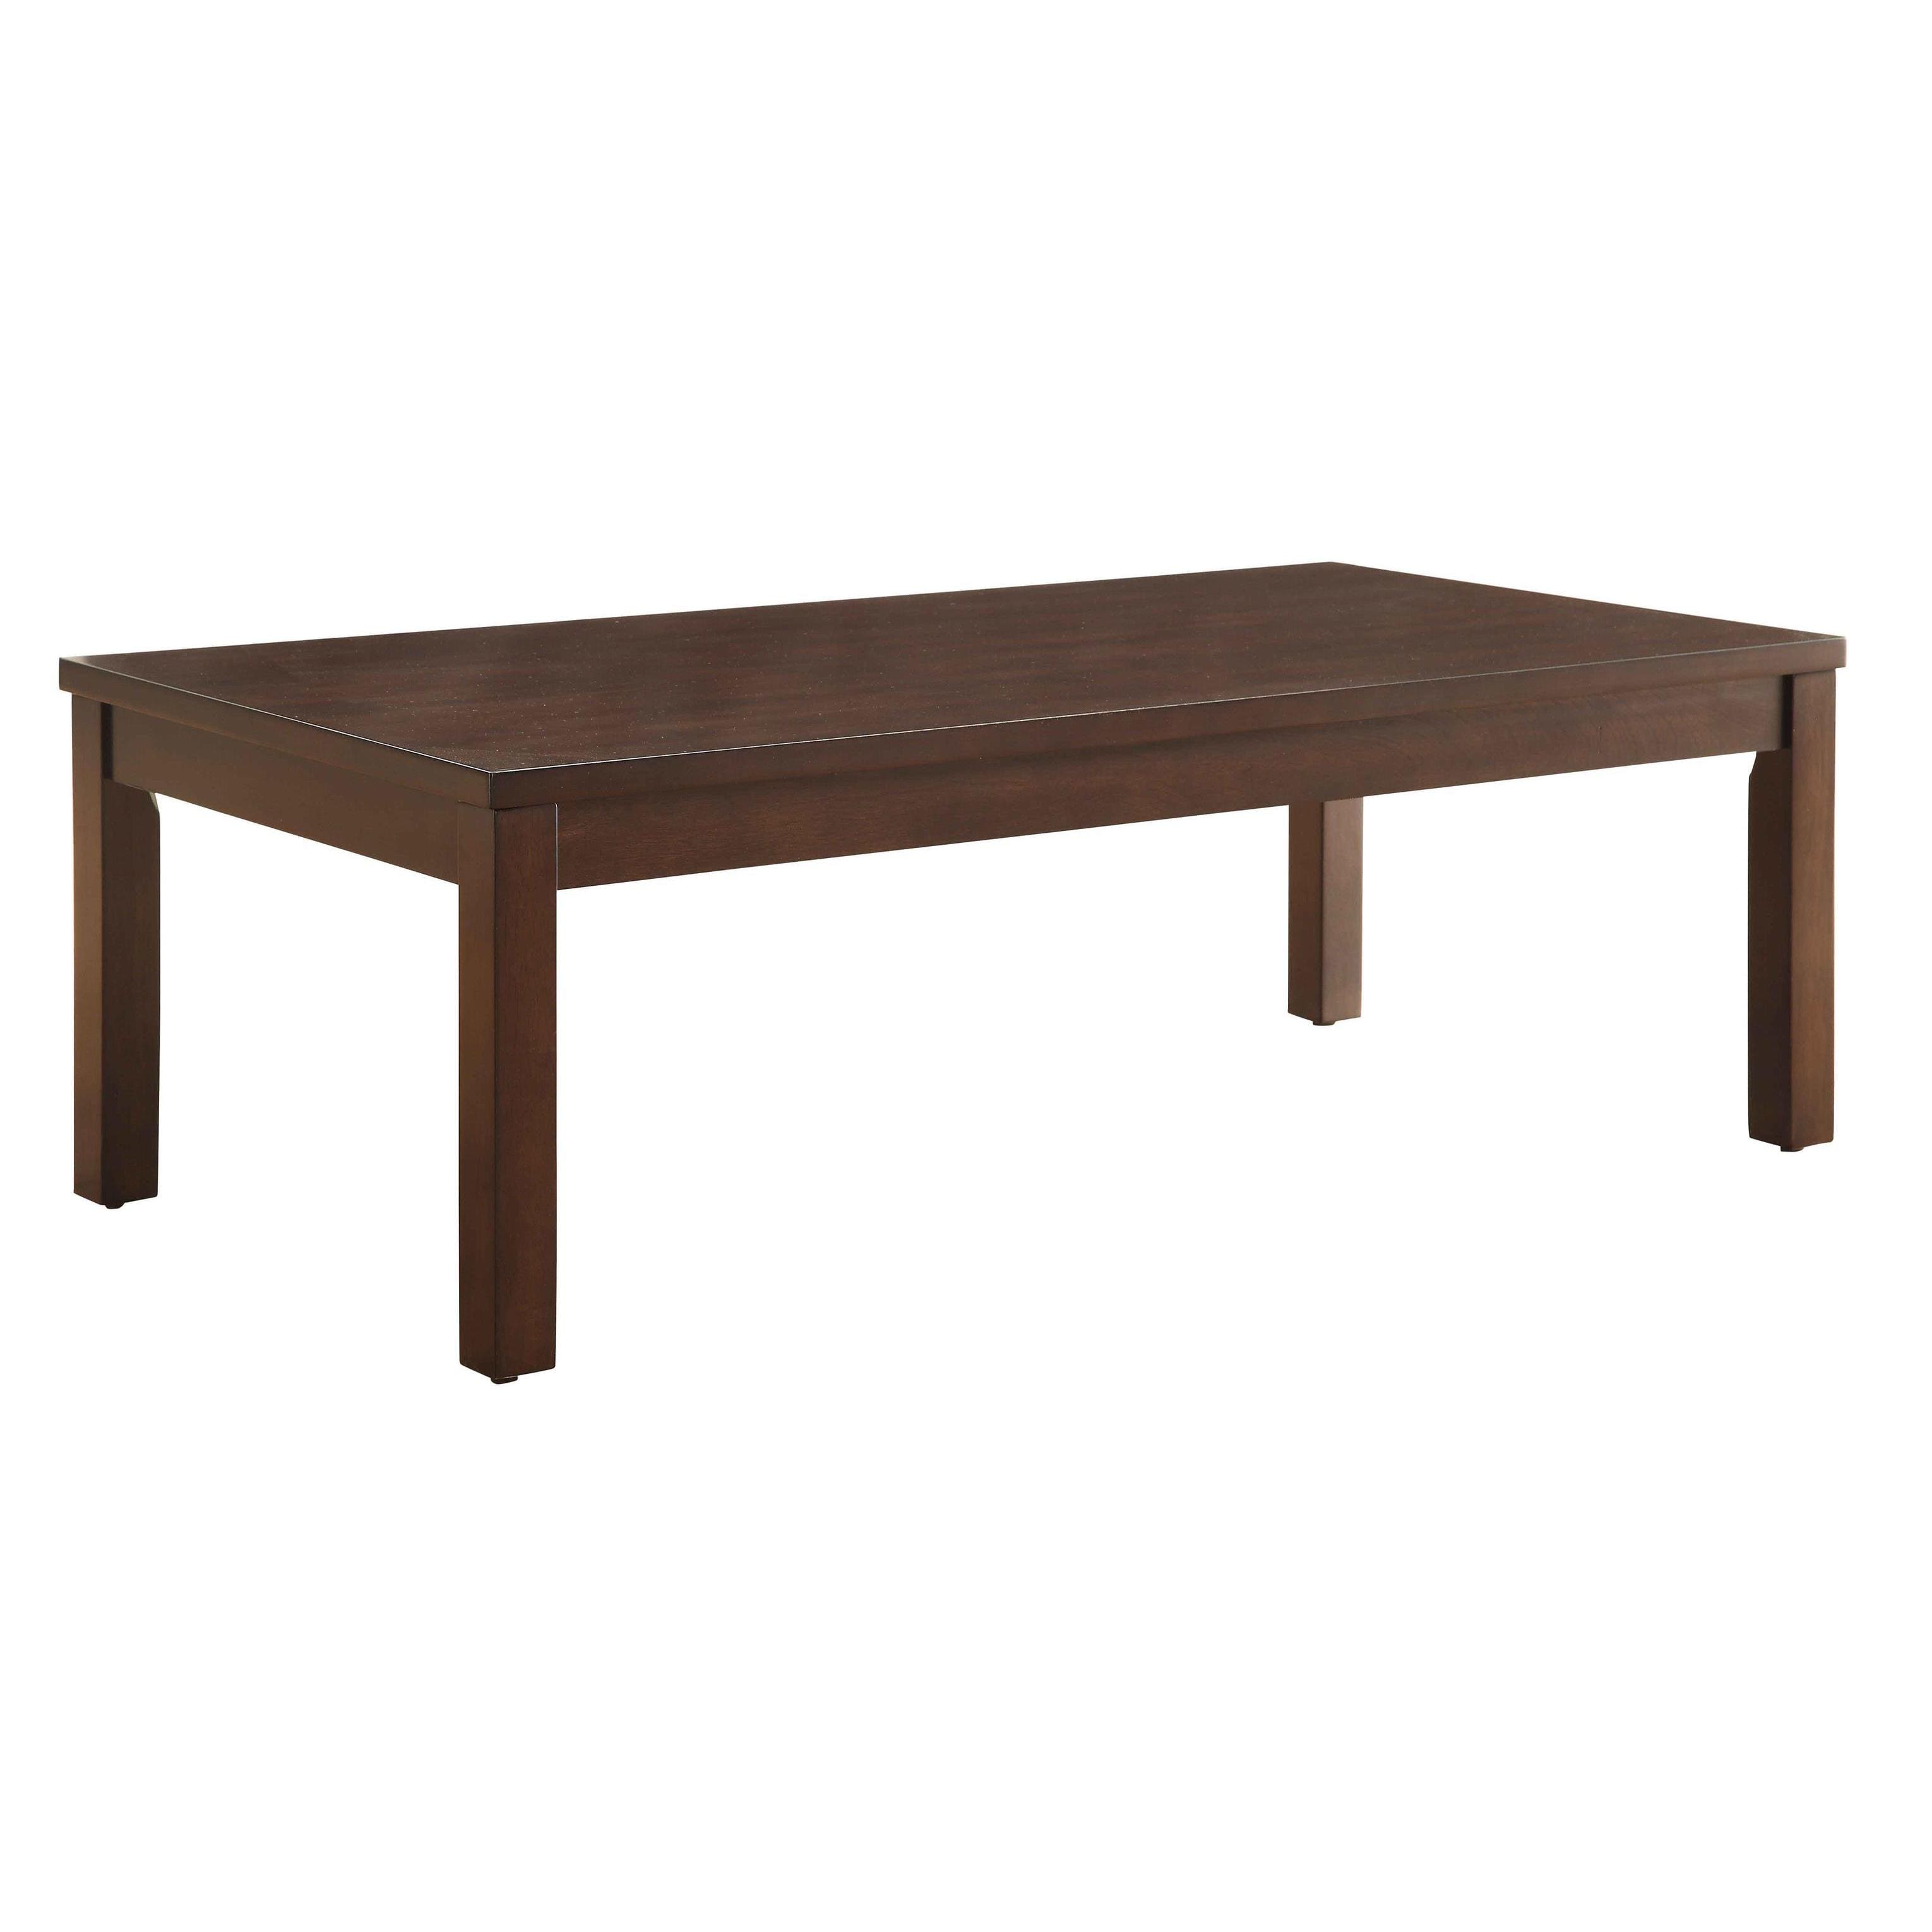 ACME Malak 3Pc Pack Coffee/End Table Set, Walnut-Finish:Walnut,Style:Contemporary/Casual - image 3 of 4